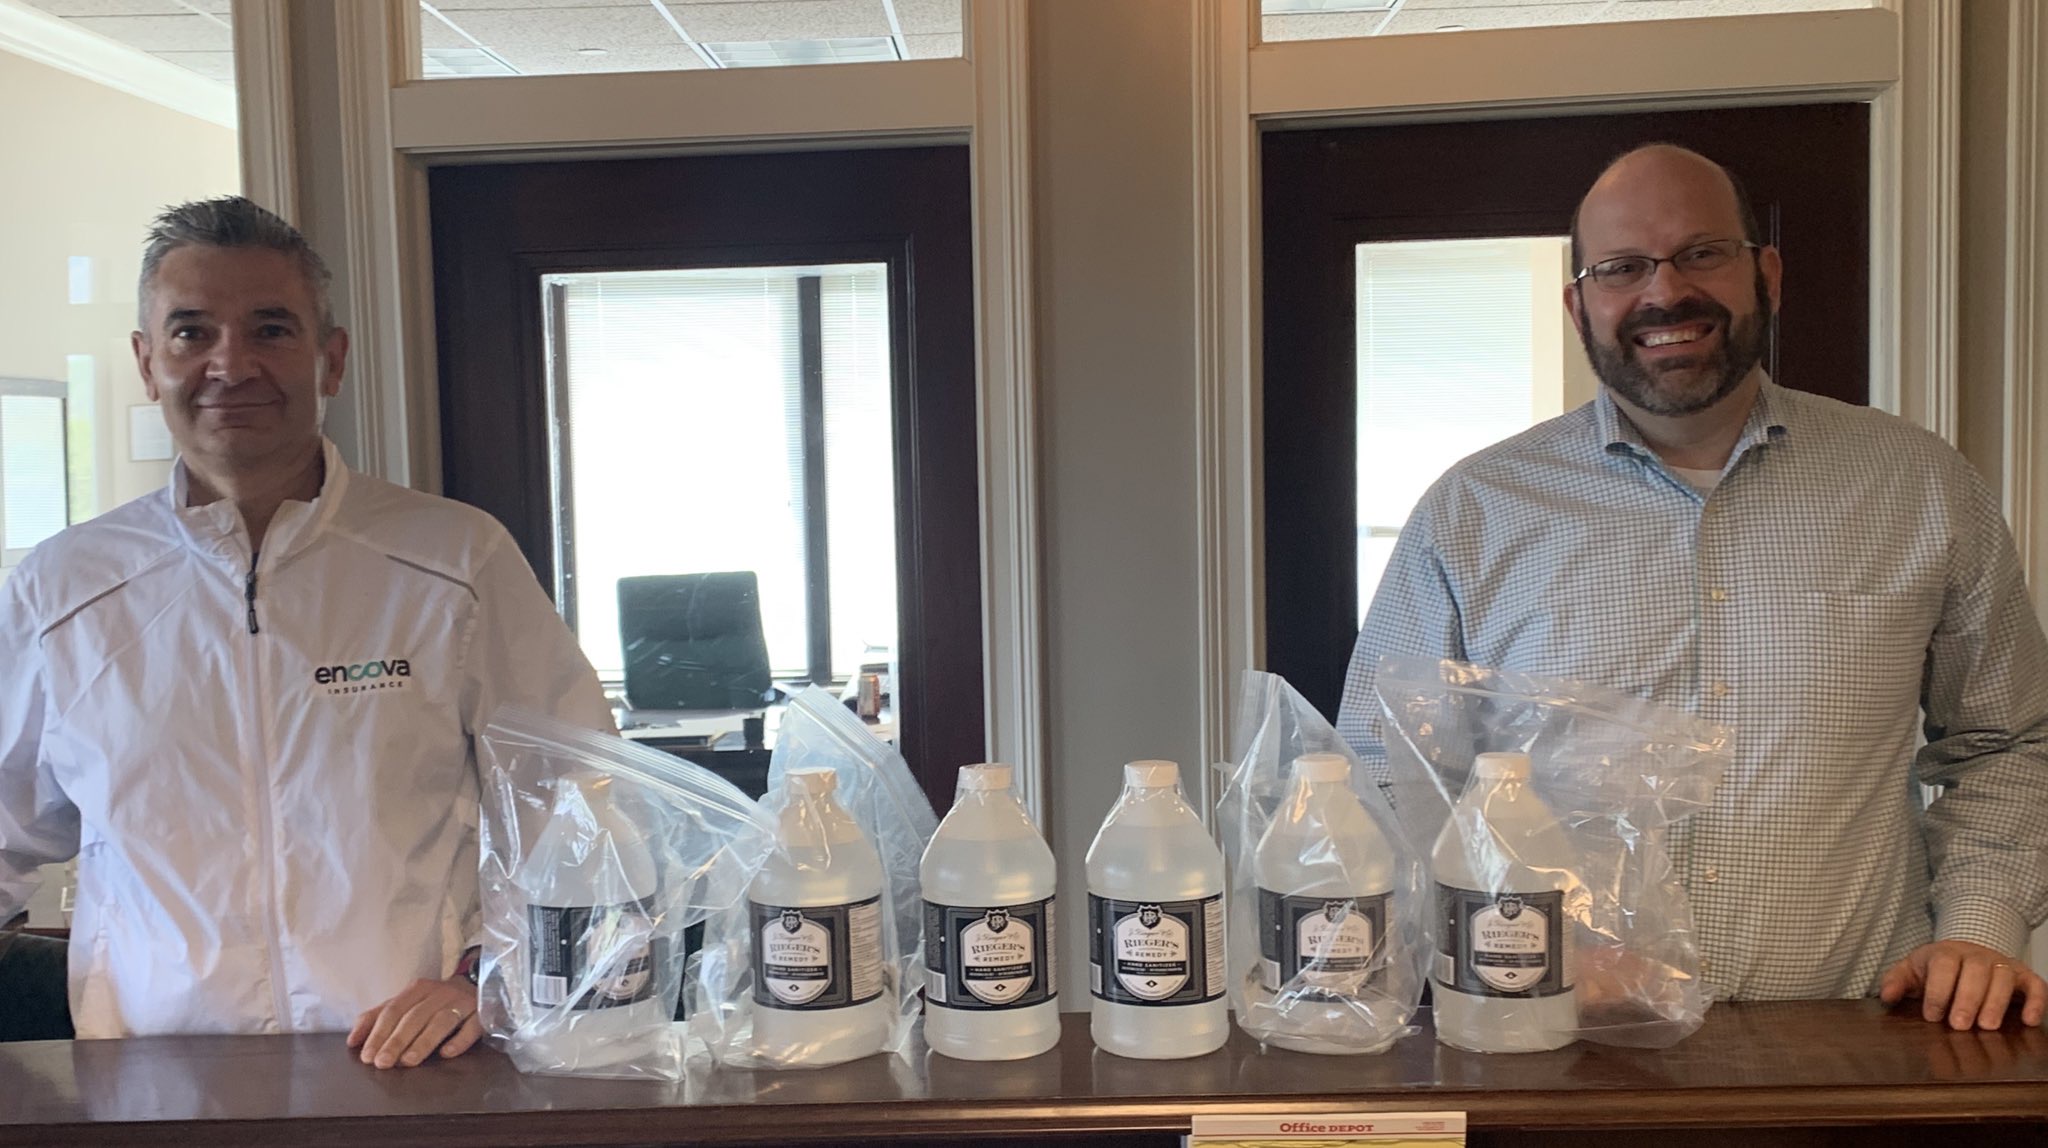 (Left to right) Toney Stroud, an attorney with Encova Insurance and Chair of the Huntington Regional Chamber, joins with Nick Preservati of Spilman Thomas & Battle law firm to deliver jugs of liquid hand sanitizer to area restaurants. 